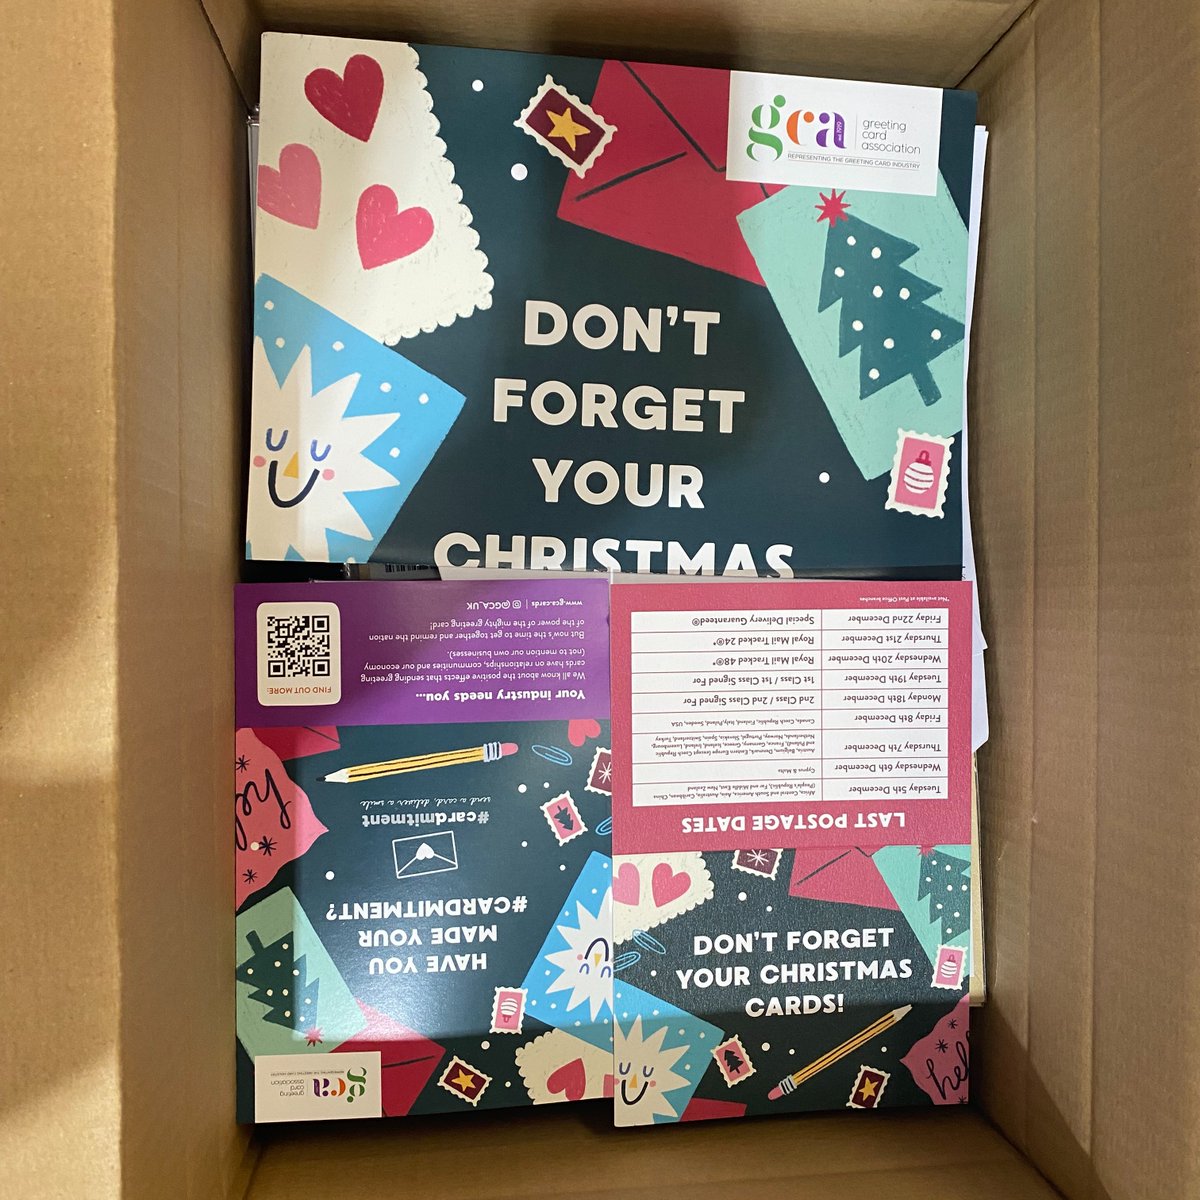 We are taking part in the #Cardmitment campaign by sending out #Cardmitment packs with orders. These can be used by retailers to remind people of the joy of sending and receiving cards at Christmas. Download the pack for free using the link below: gca.cards/cardmitment-to…